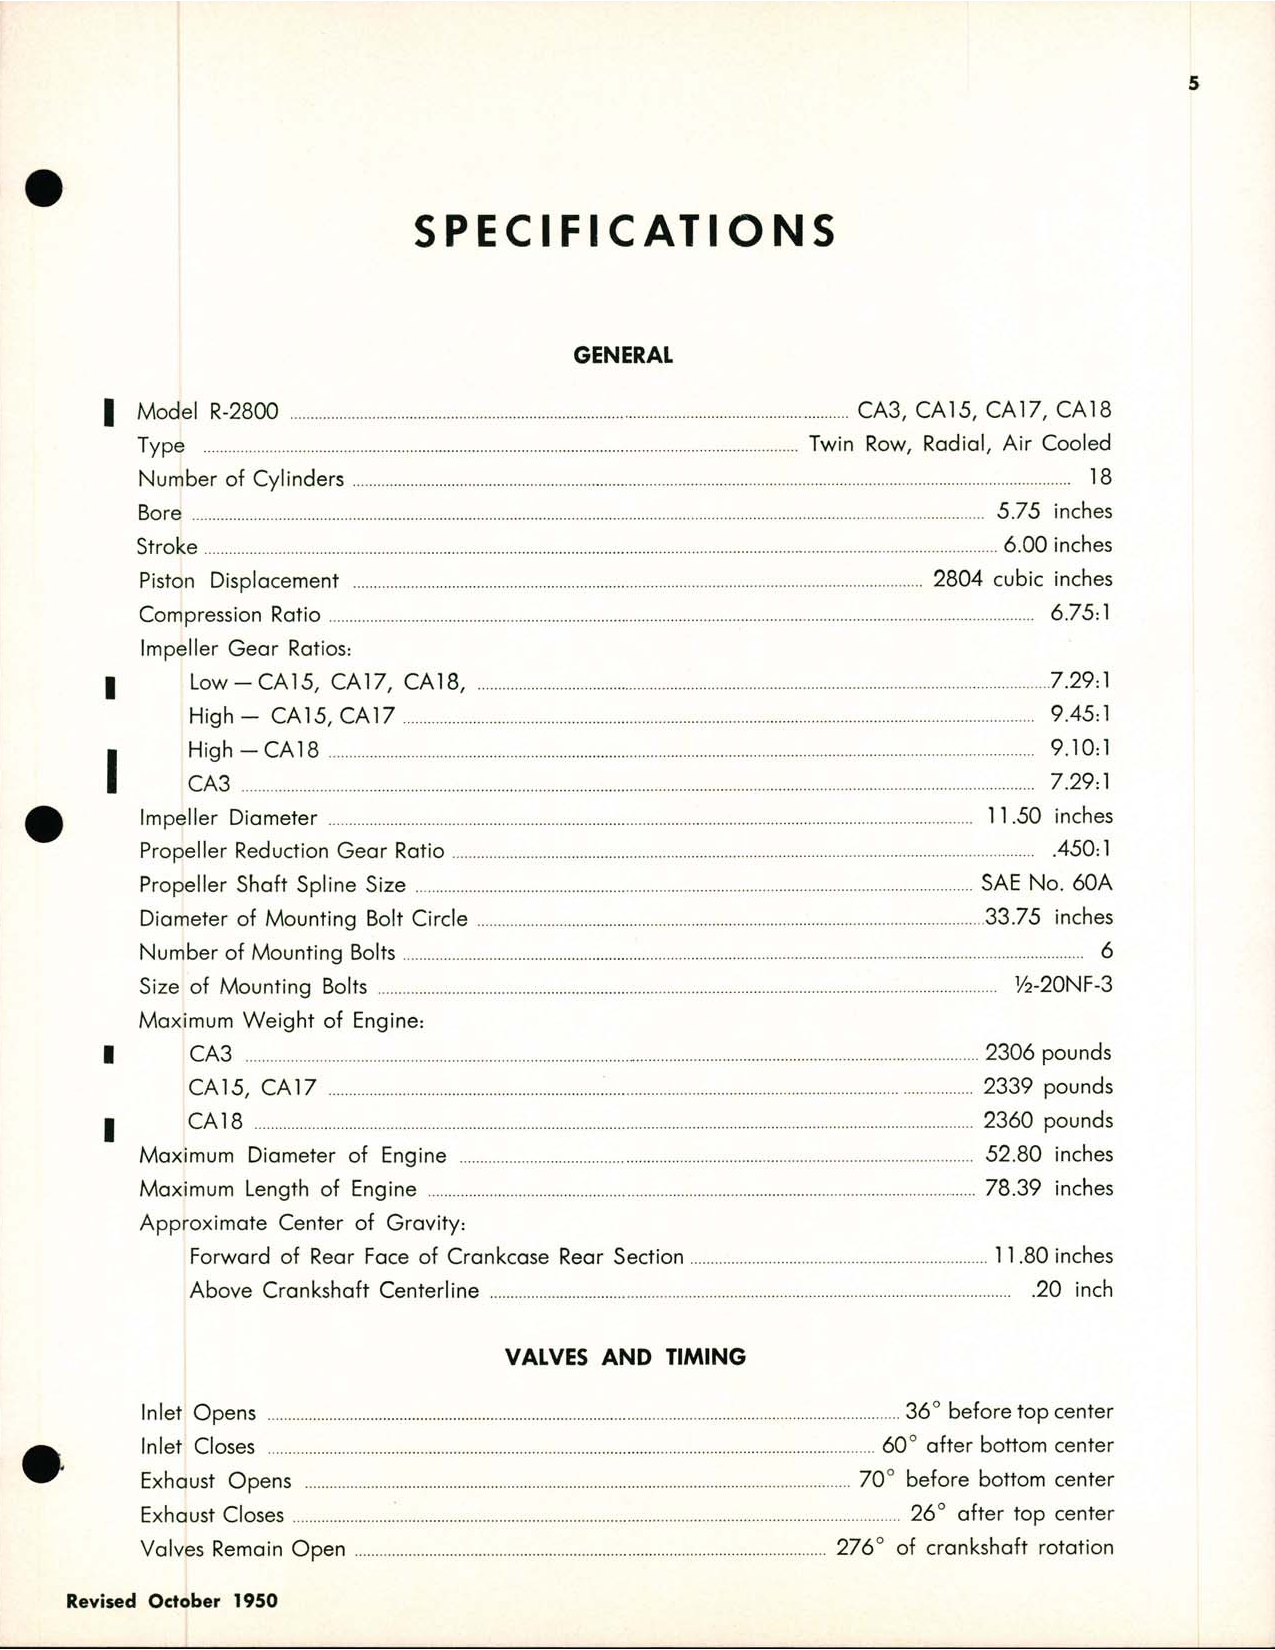 Sample page  5 from AirCorps Library document: Double Wasp R-2800 CA Engine Maintenance Manual - Pratt & Whitney Aircraft